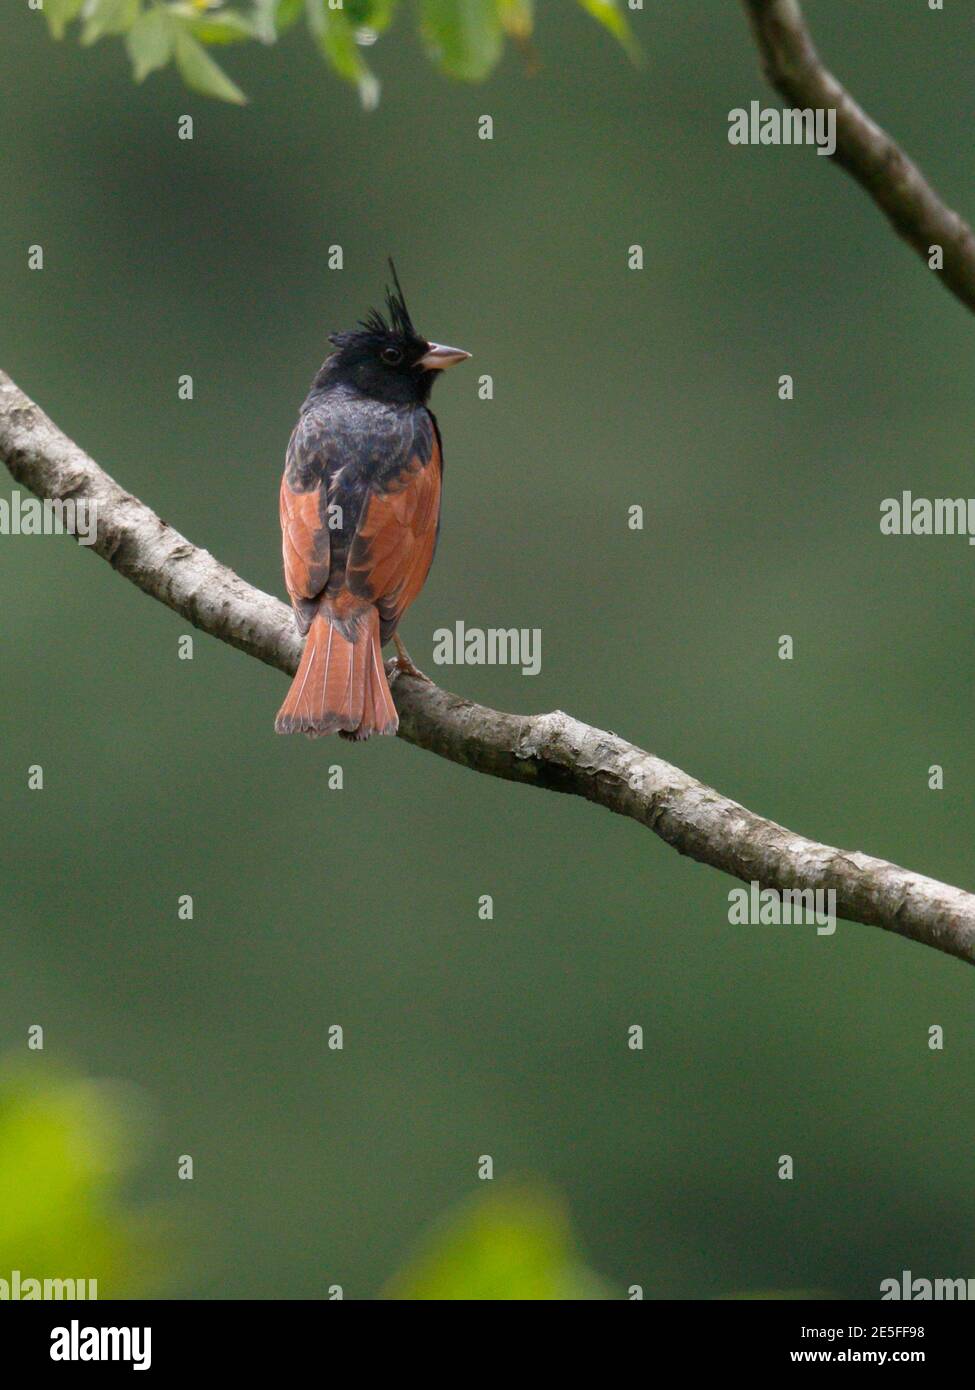 Crested Bunting (Melophus lathami), adult perched on a branch, green background, Longchuan County, Guangxi Province, China 21st April 2016 Stock Photo